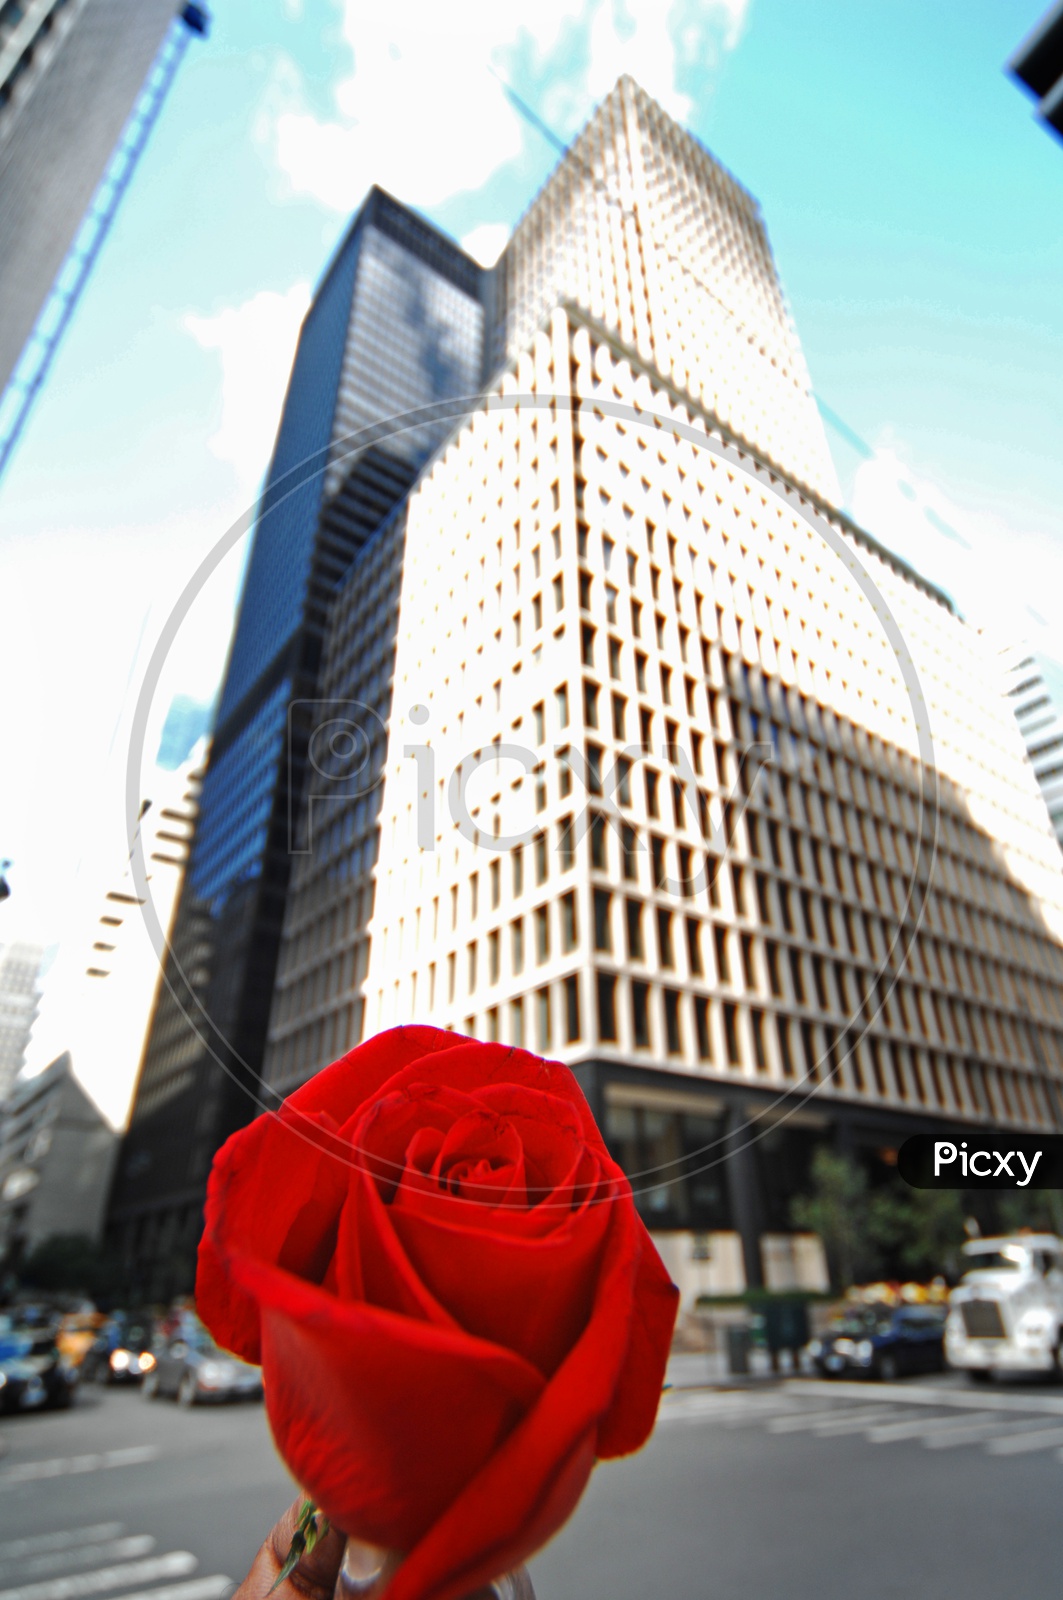 A man holding red rose and skyscraper in the background